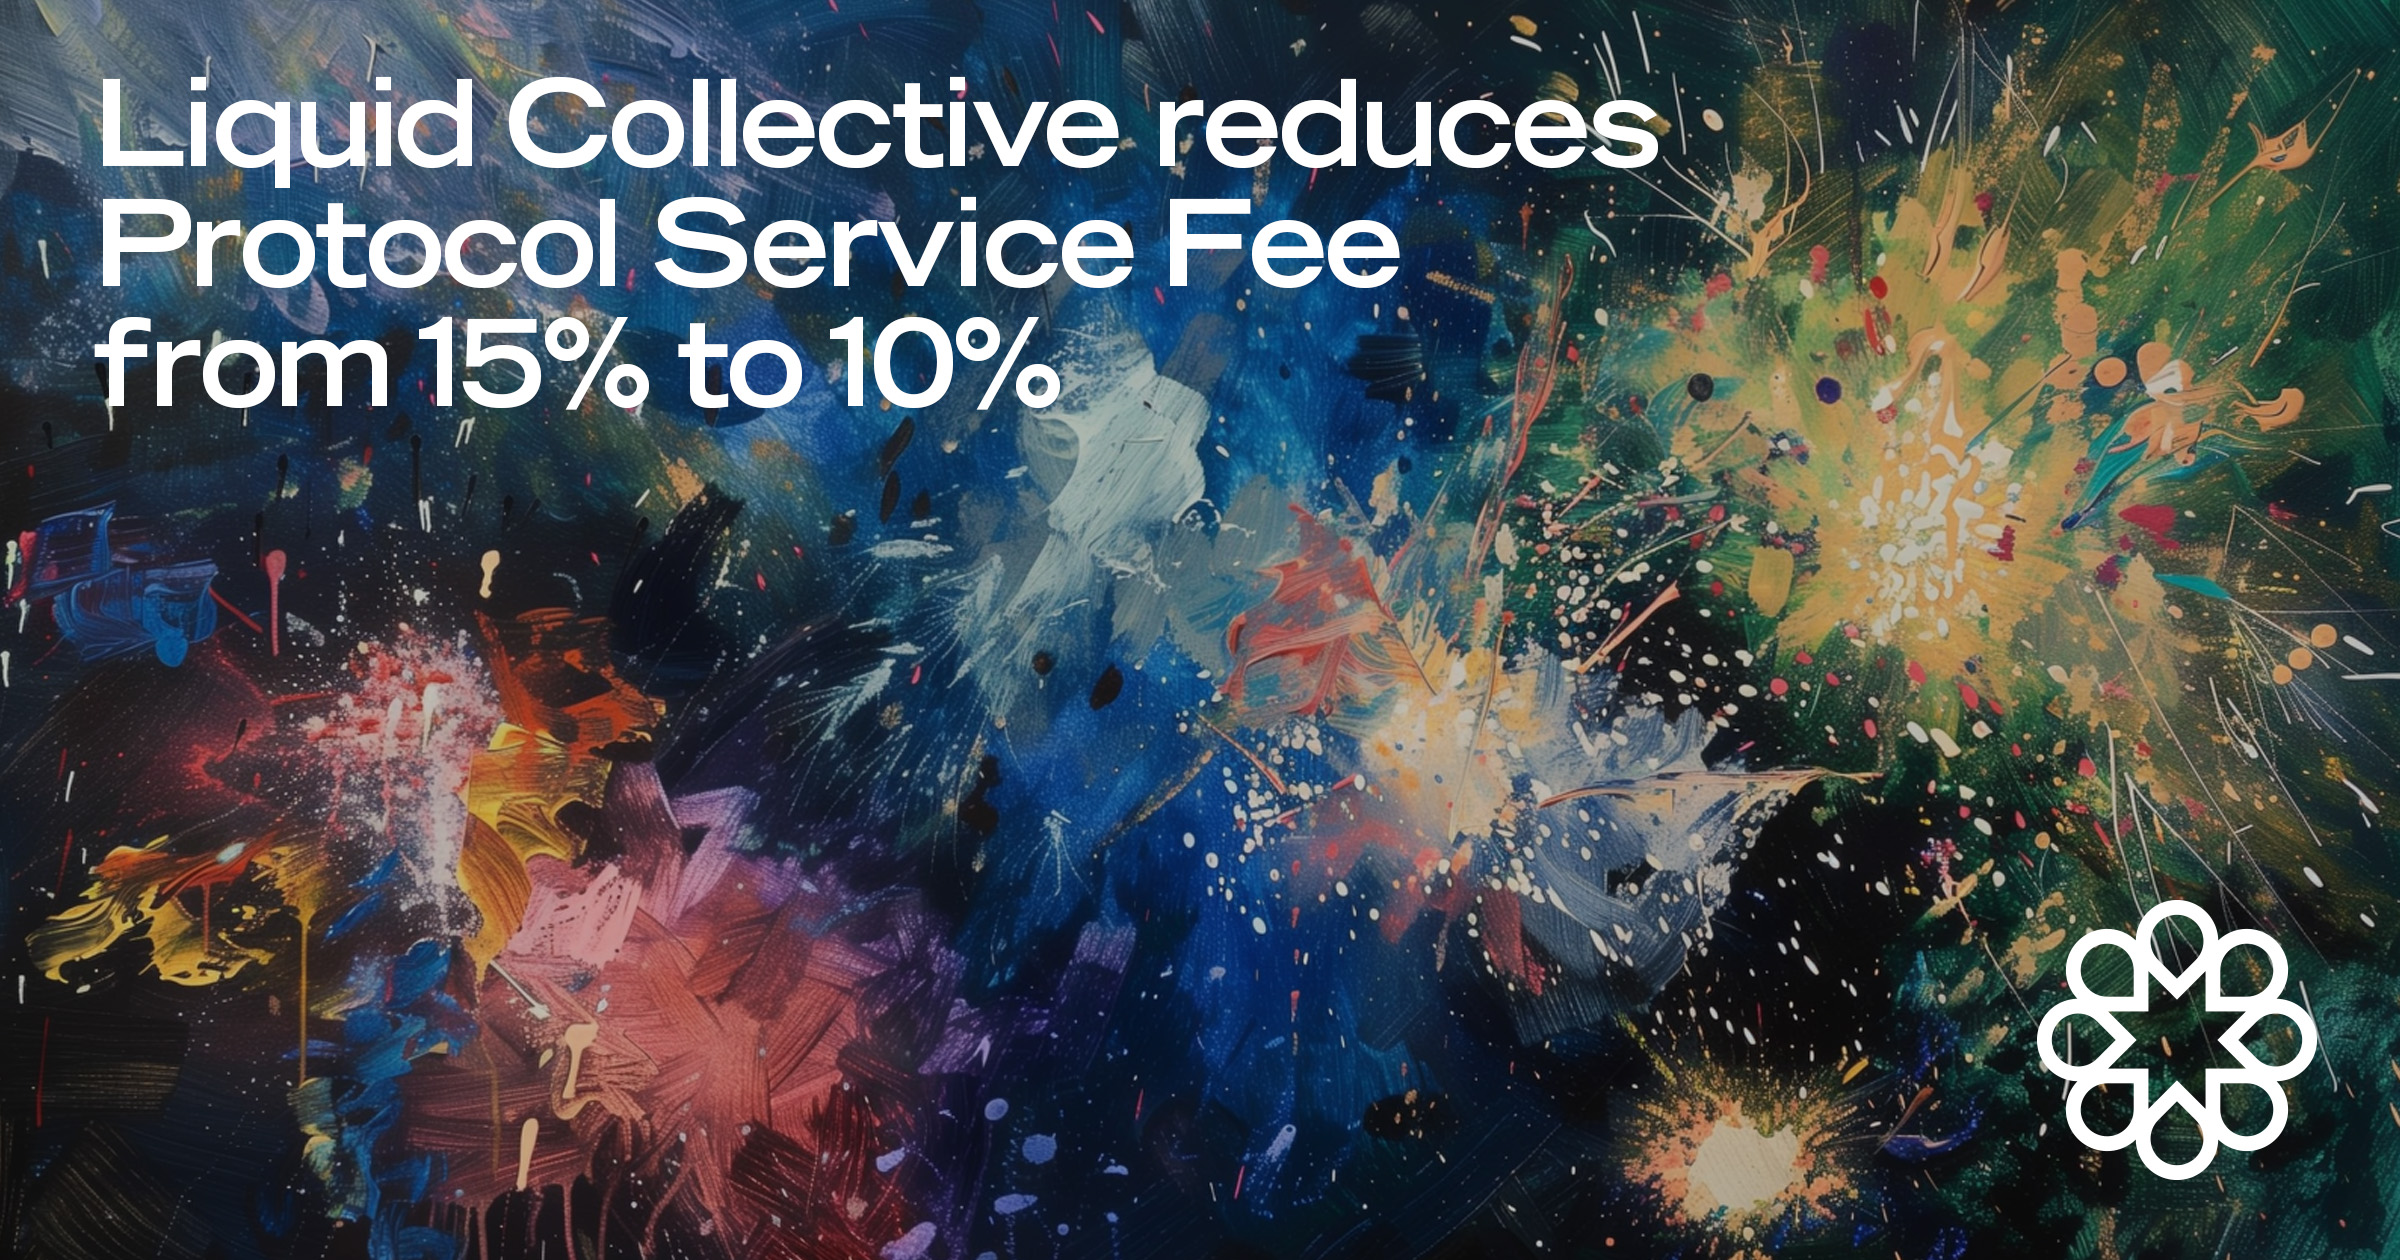 Liquid Collective reduces Protocol Service Fee from 15% to 10%